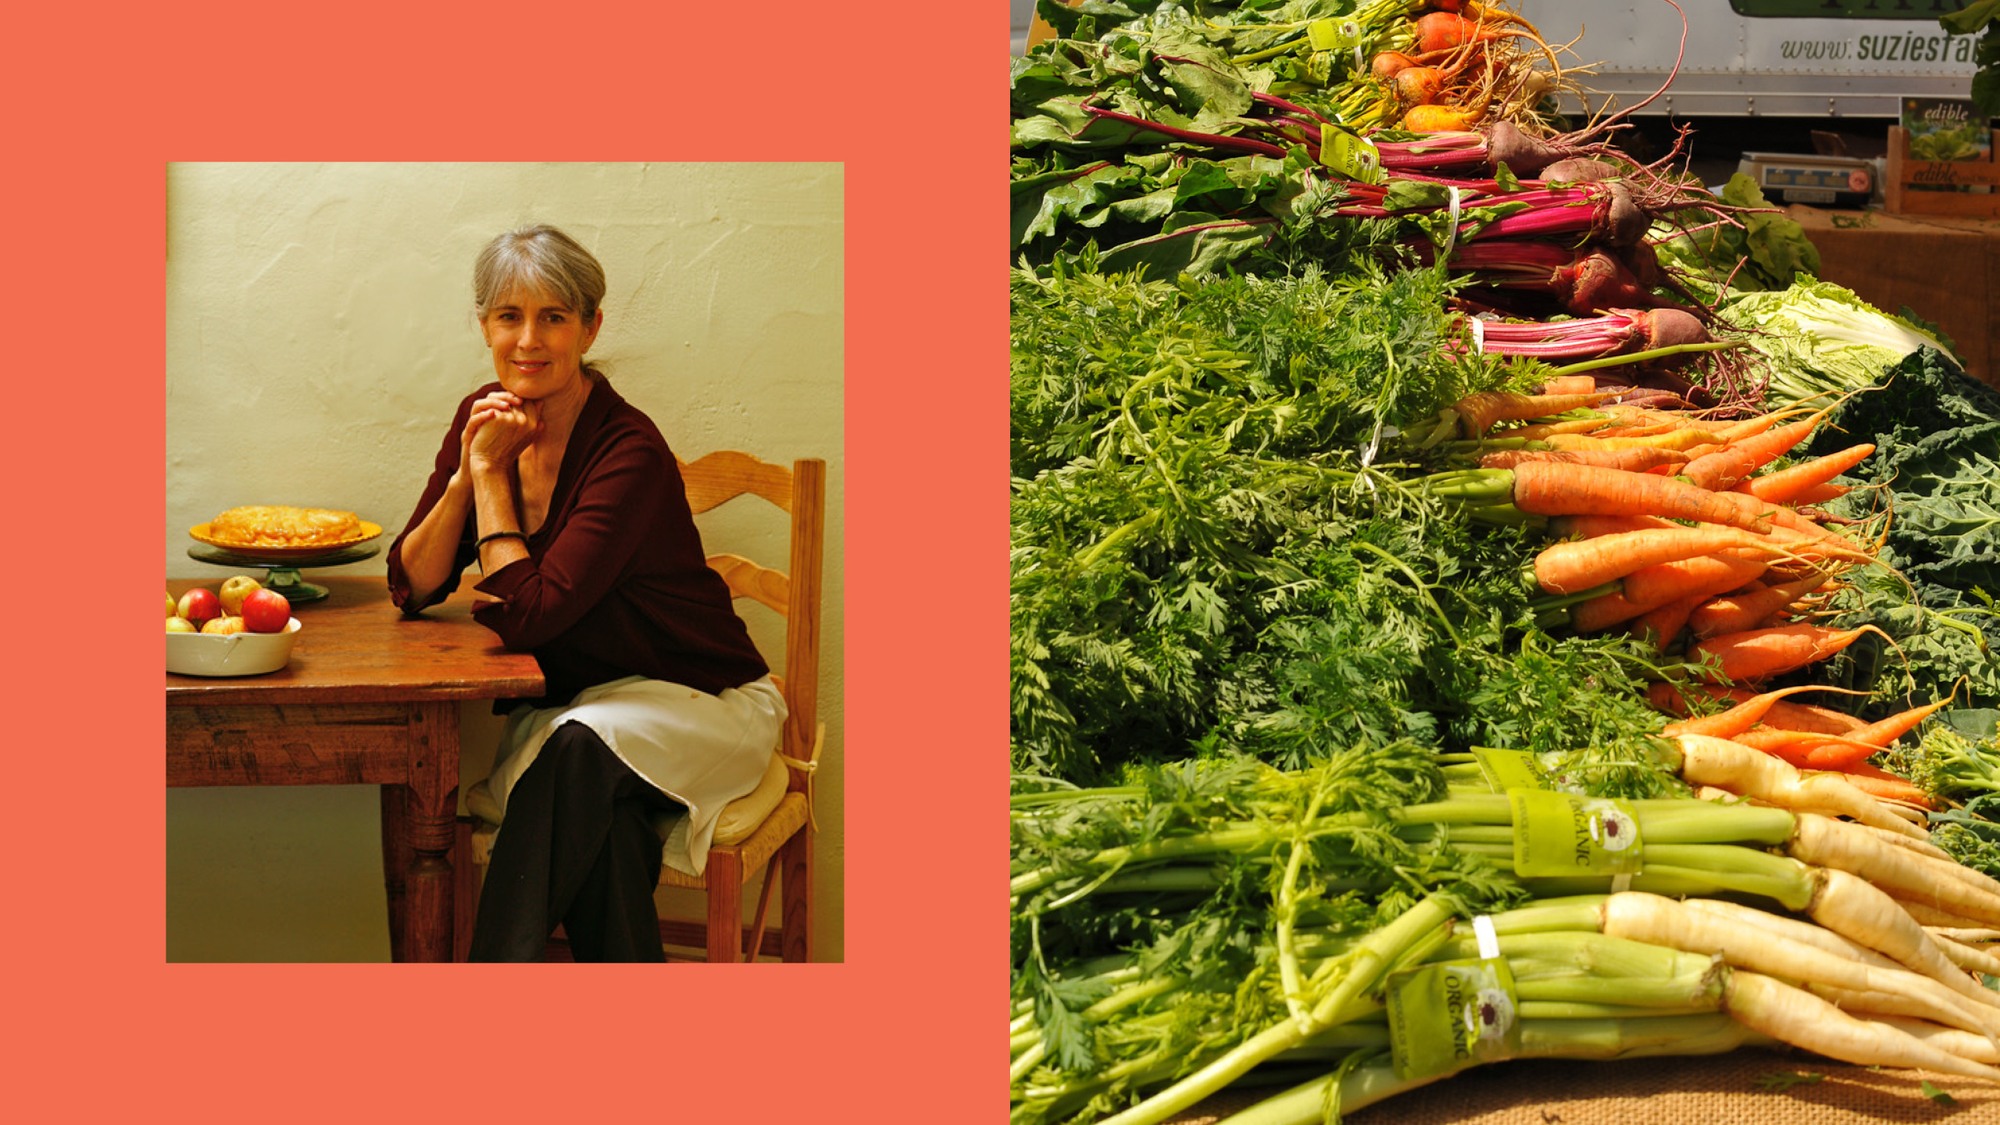 She’s written 14 veg-focused cookbooks, yet Deborah Madison is not a vegetarian. What can she teach us about how to cook and eat?